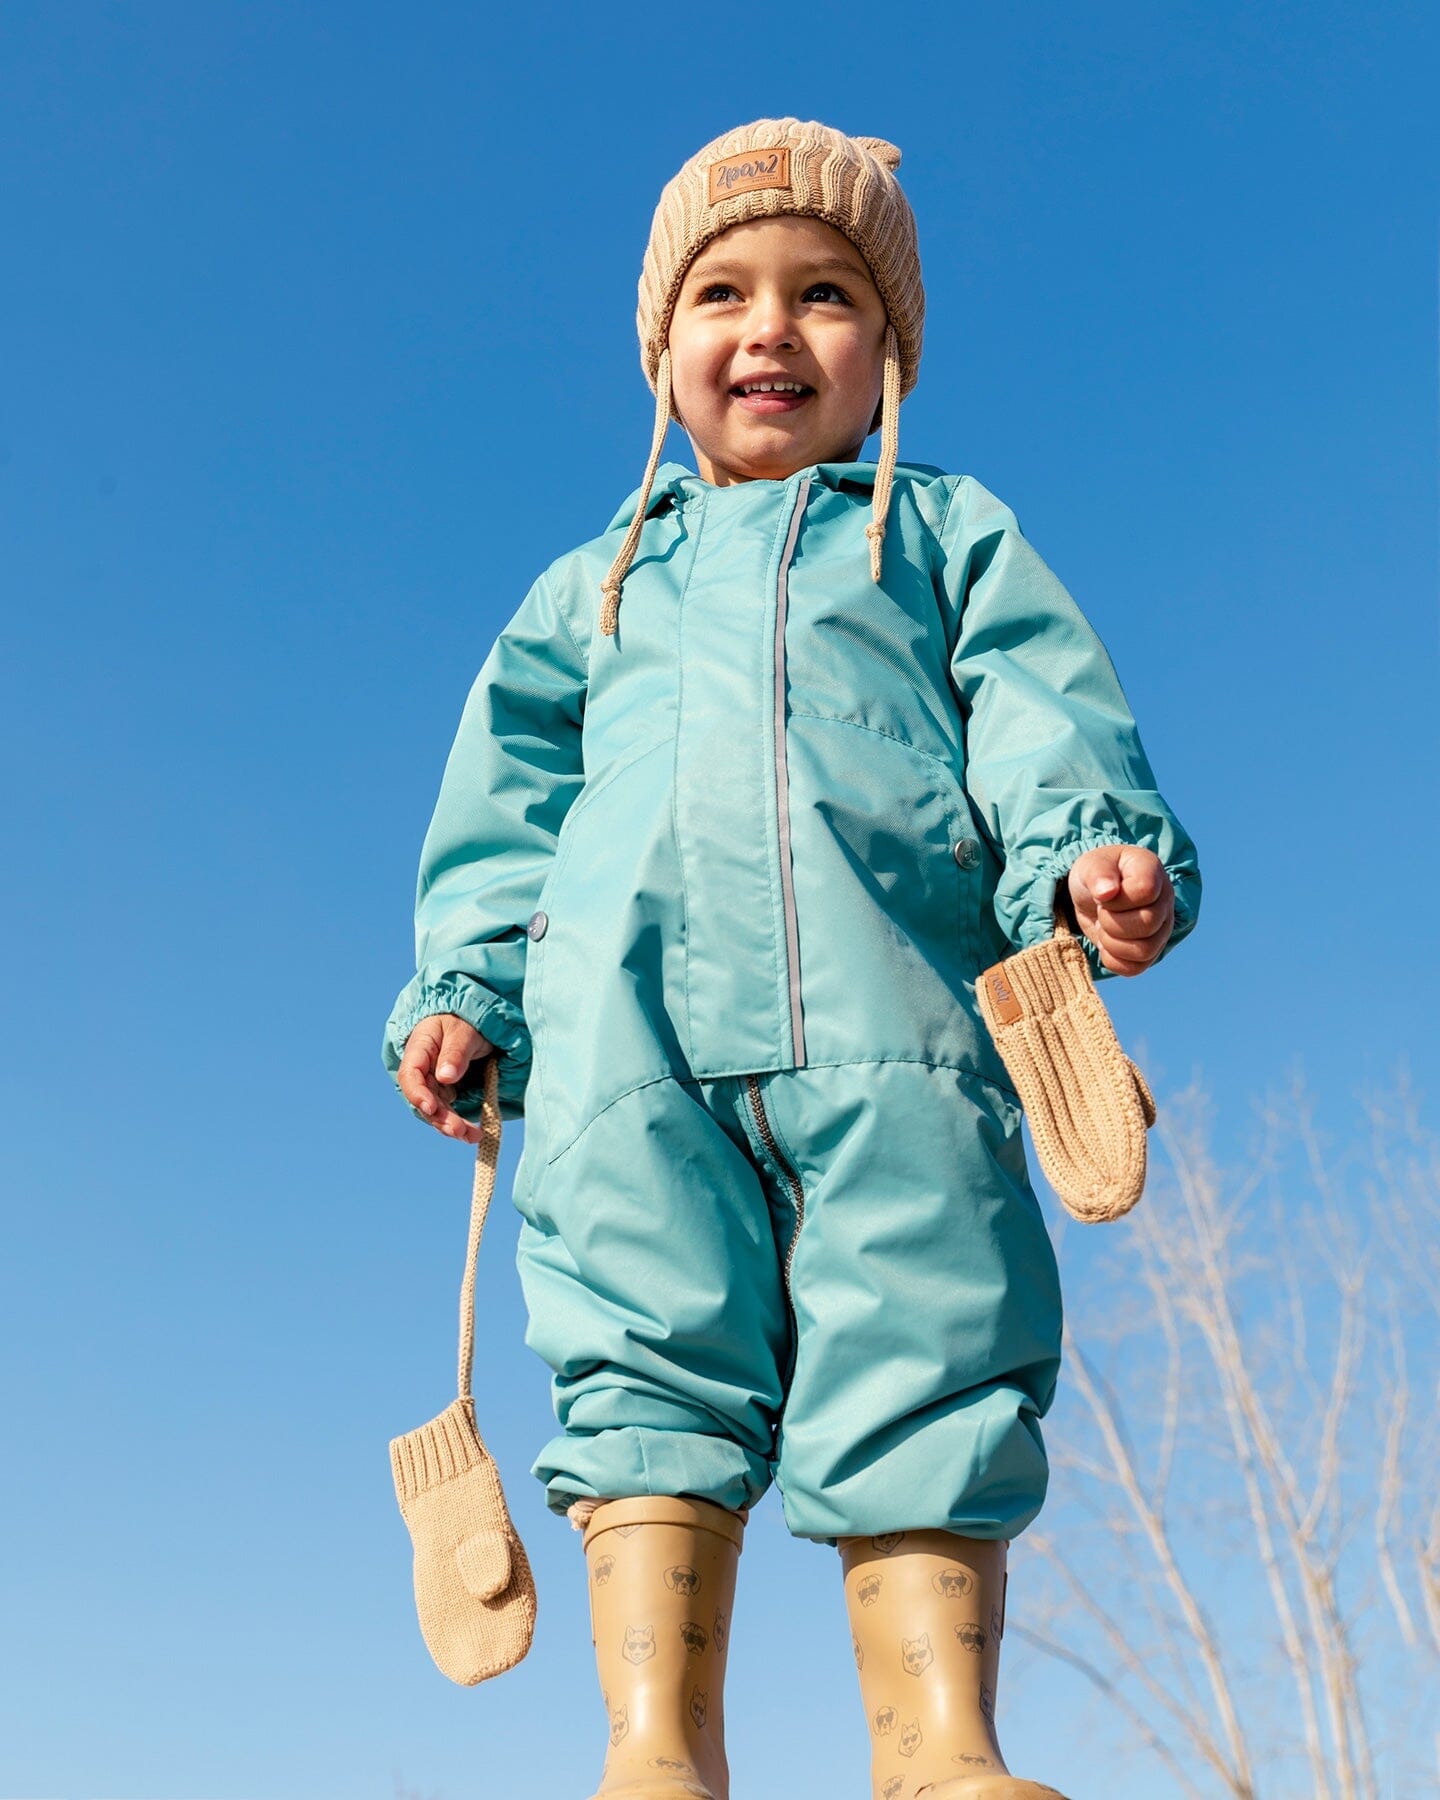 Baby Mid-Season One Piece With Hat Blue Teal - F30W65_435